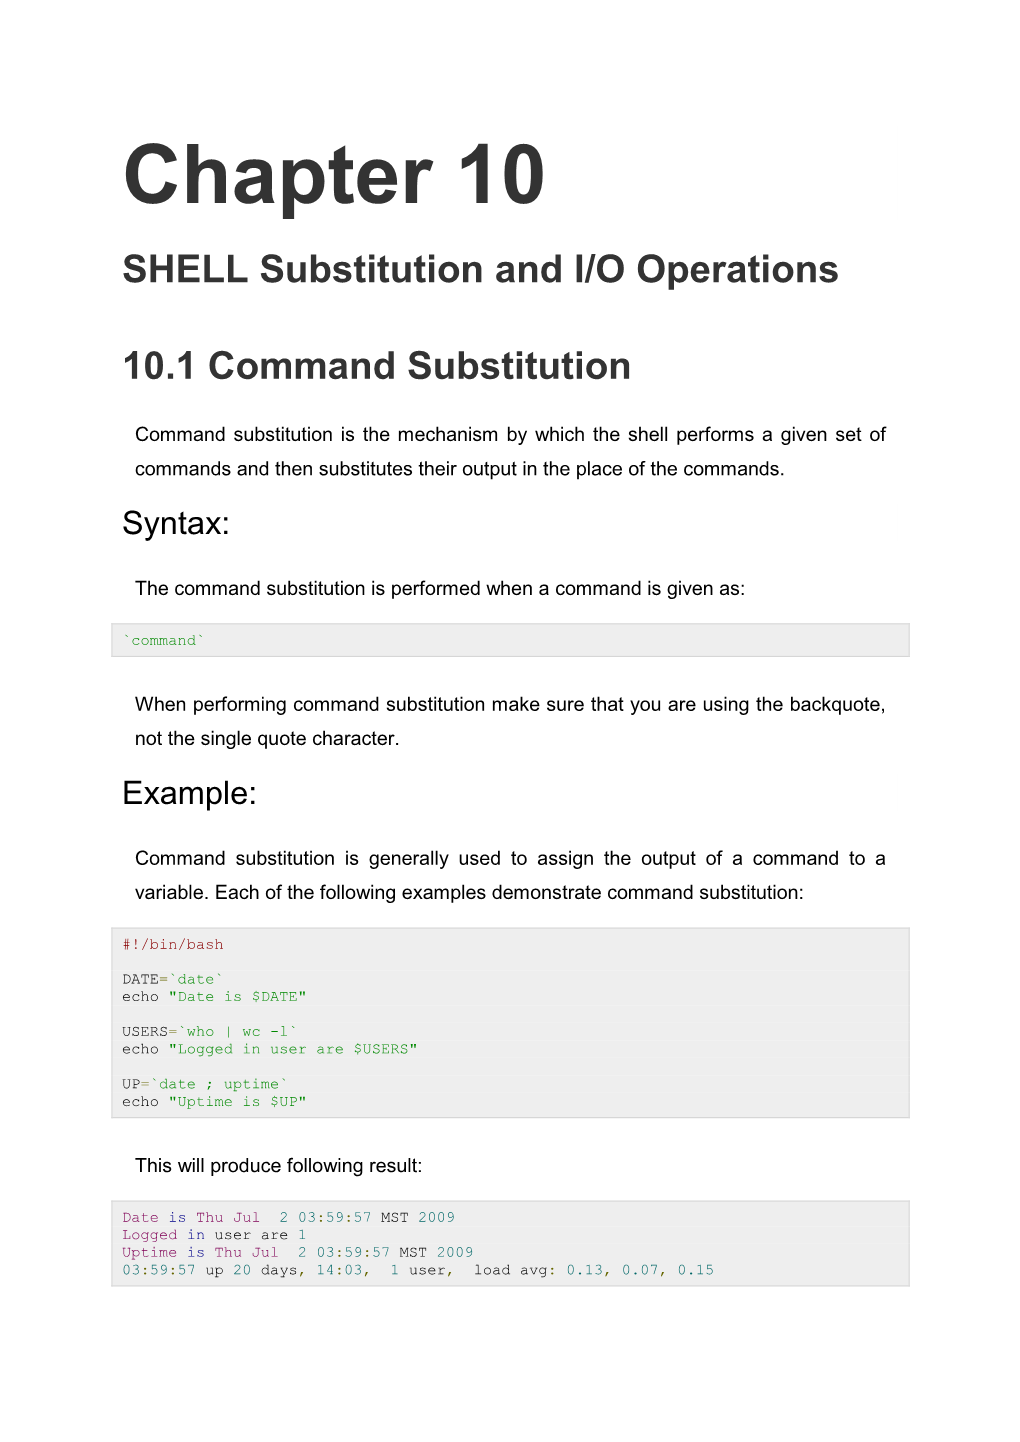 Chapter 10 SHELL Substitution and I/O Operations